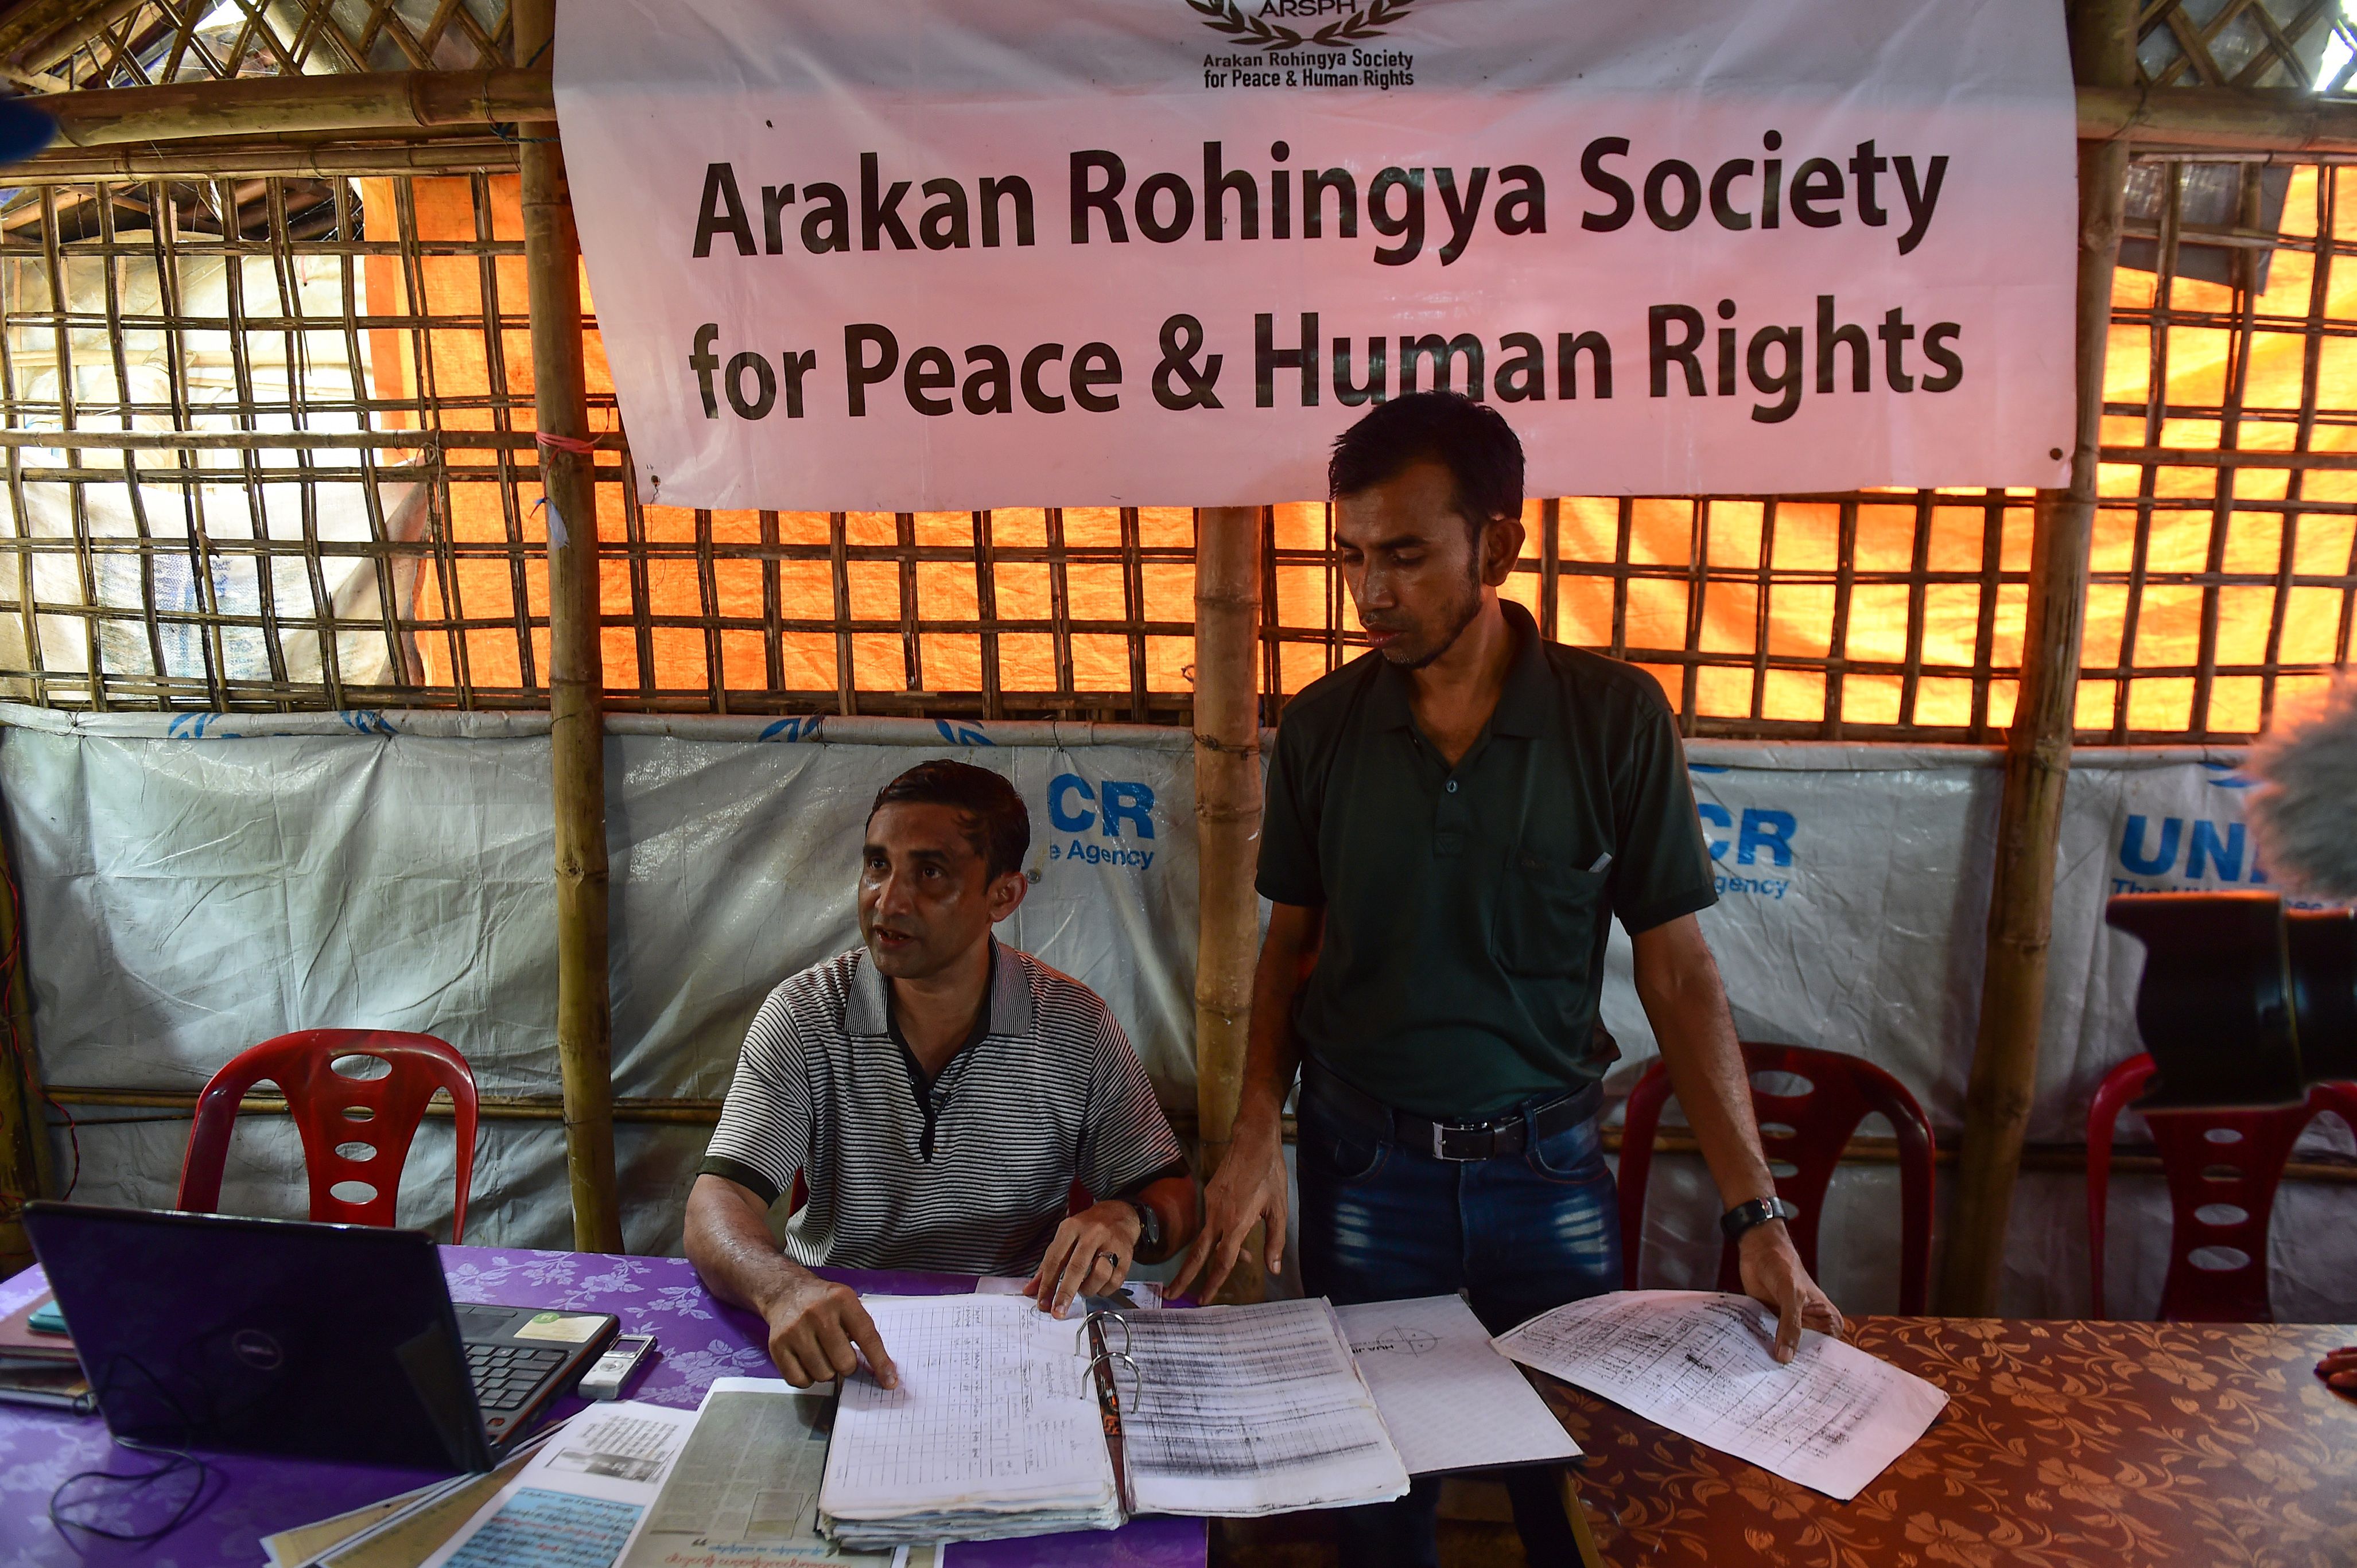 Rohingya activists collect testimony from refugees who suffered alleged abuses by Myanmar soldiers, at the Kutupalong refugee camp in Ukhia, Bangladesh on July 19, 2018. (Munir Uz Zaman—AFP/Getty Images)